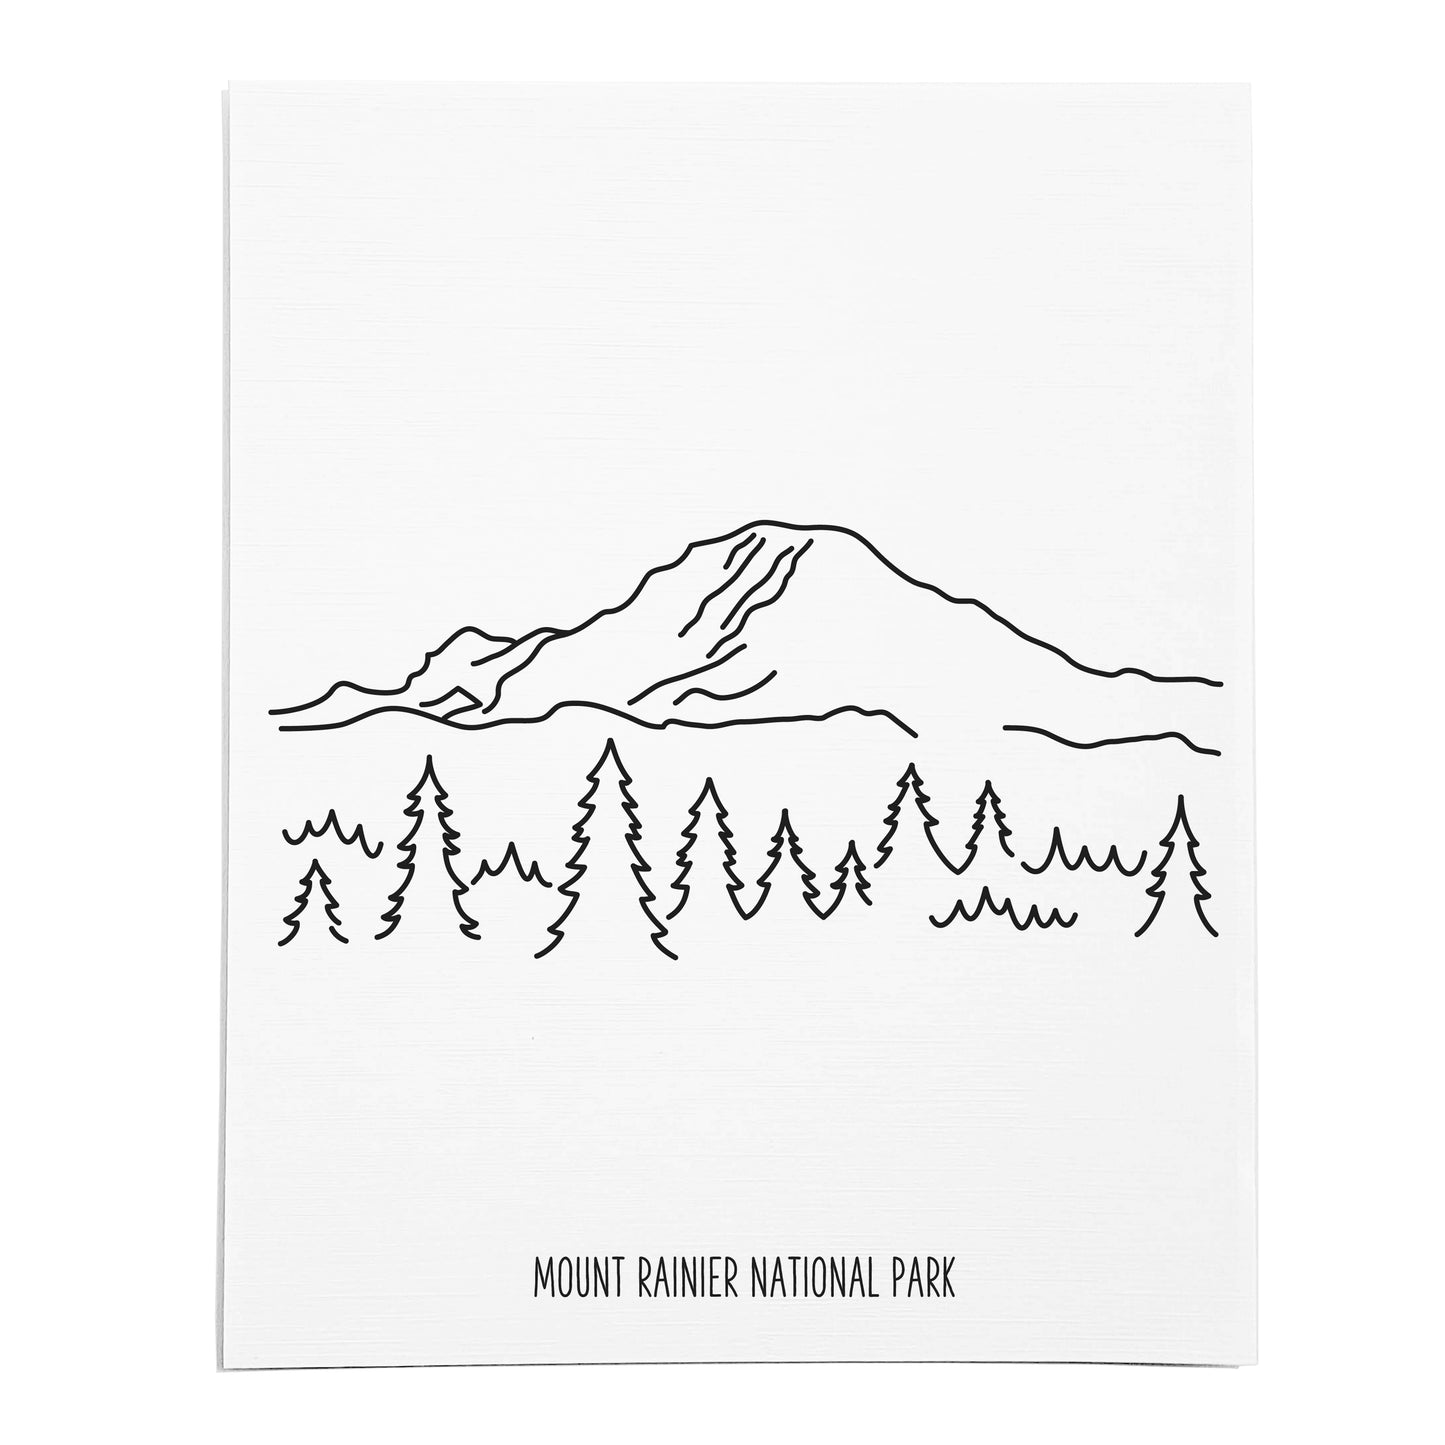 An art print featuring a line drawing of Mount Rainier National Park on white linen paper